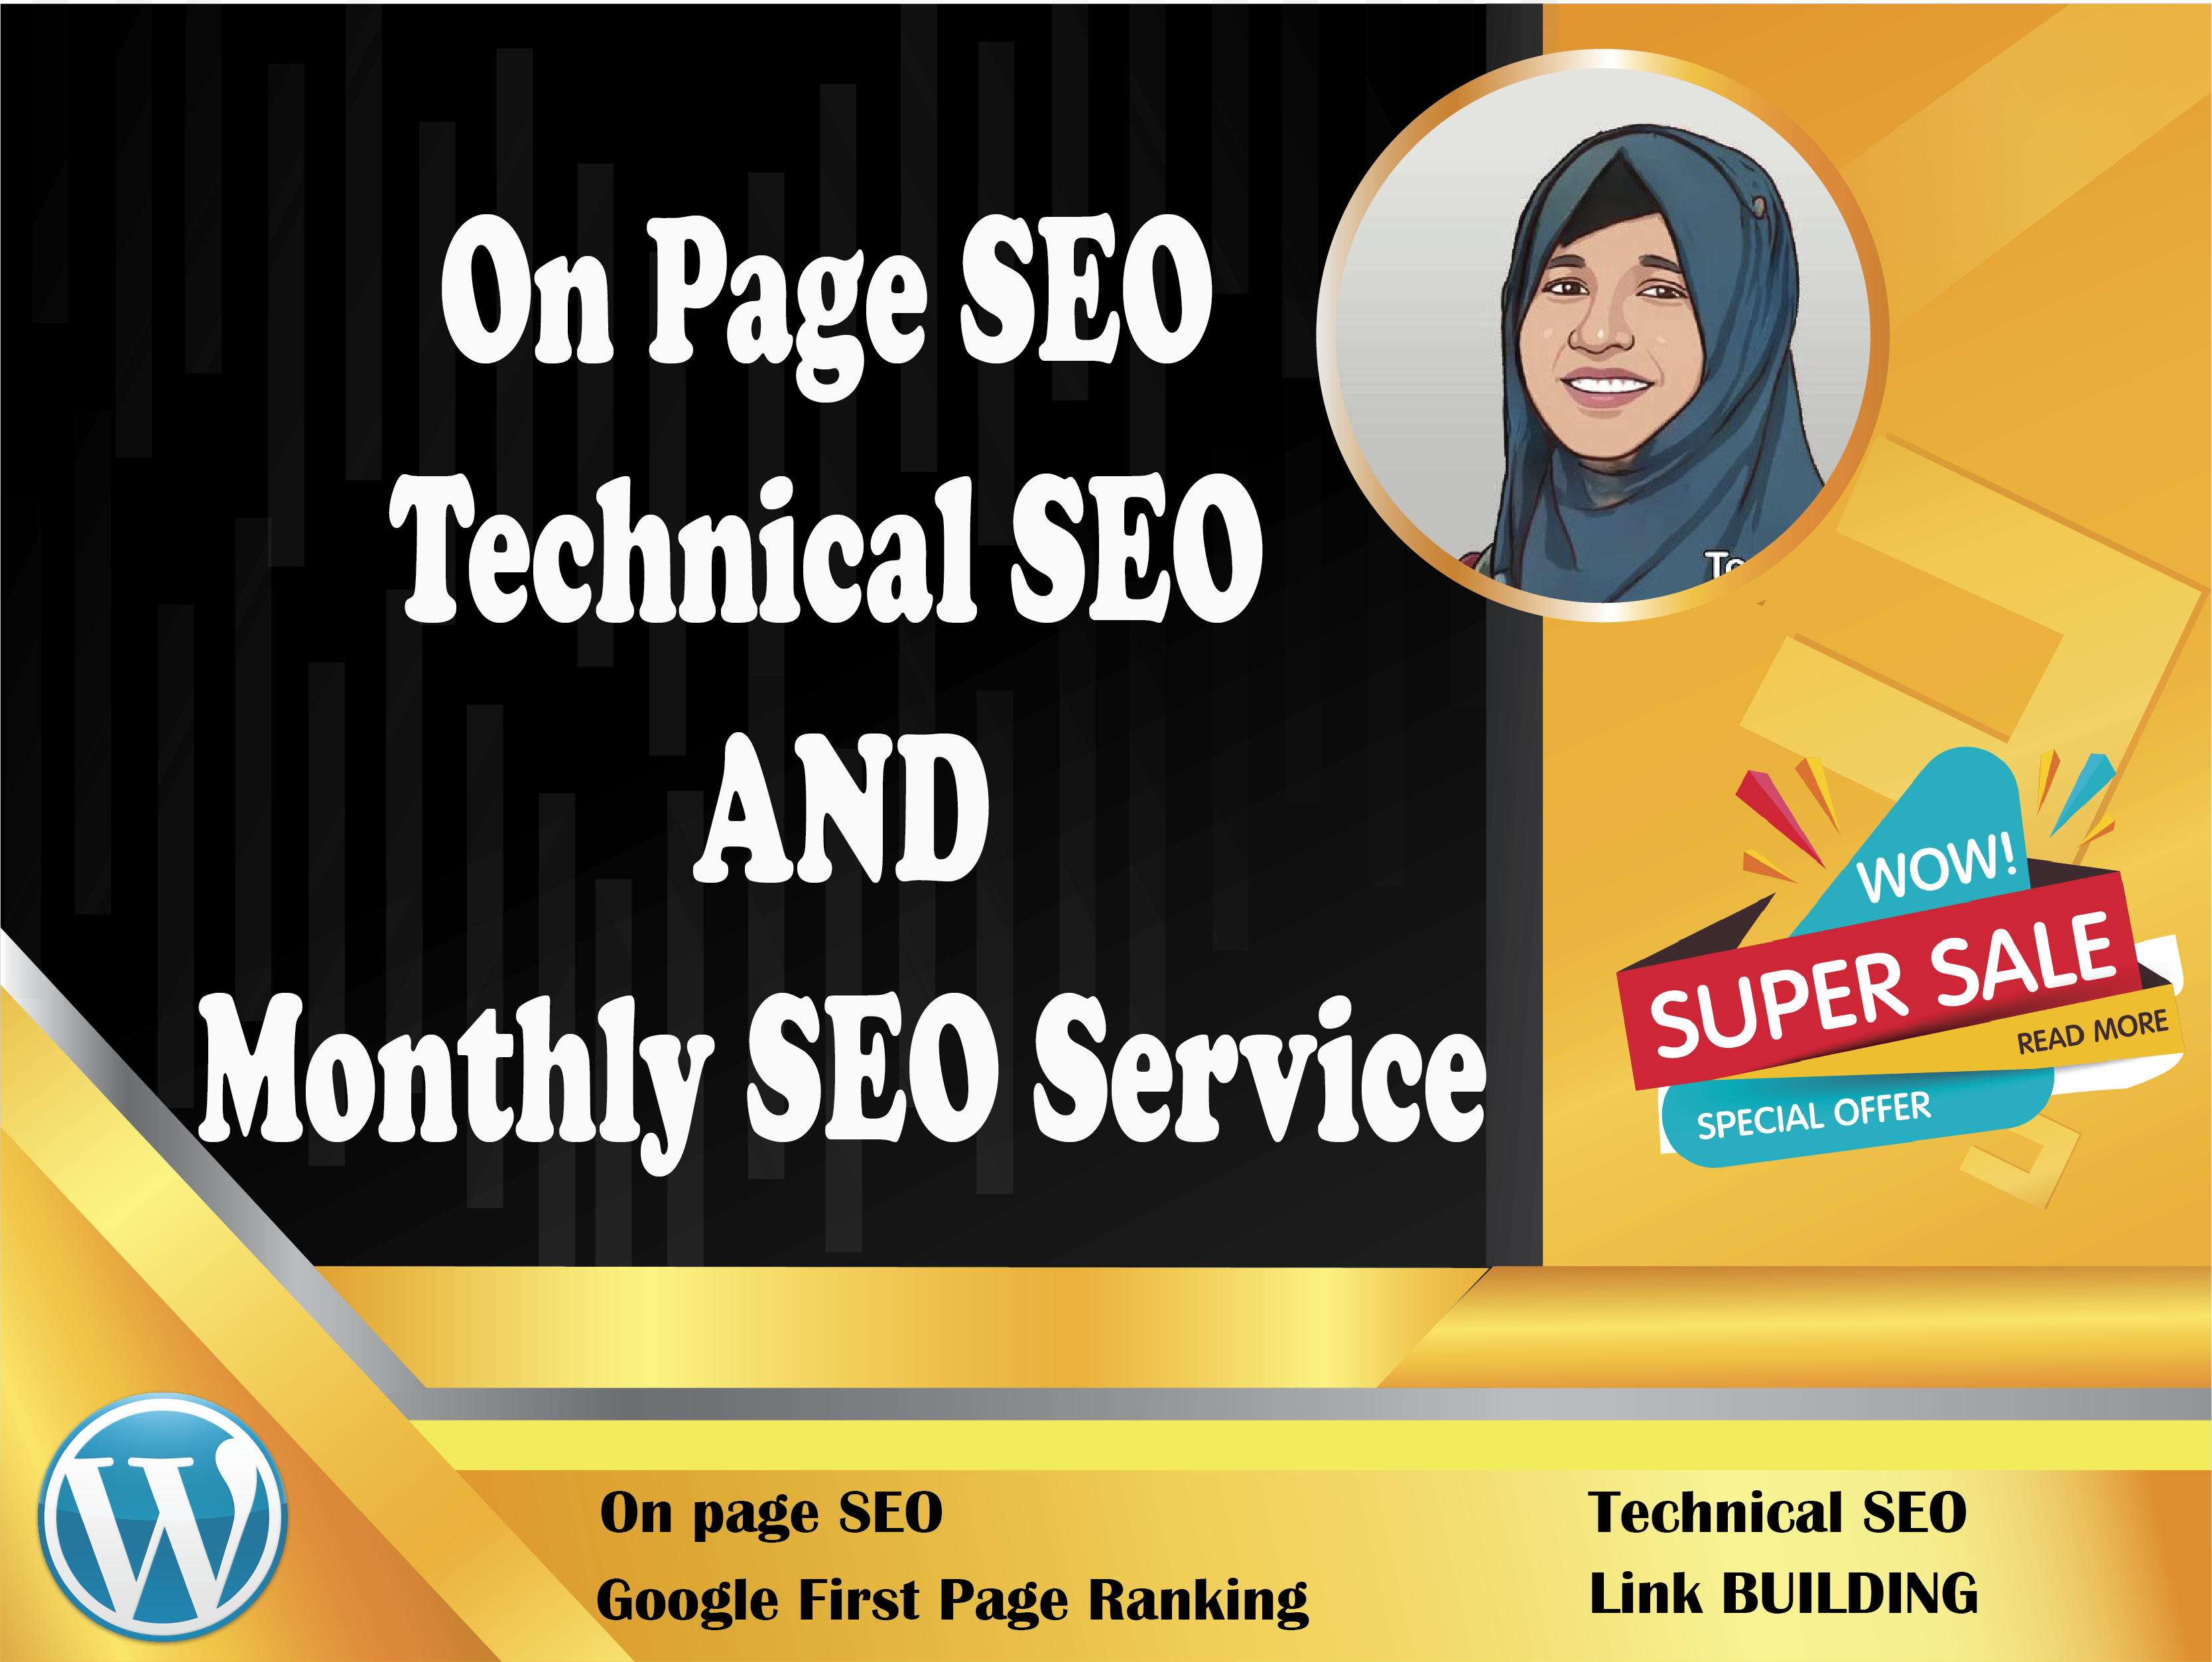 I will provide complete monthly SEO service with high quality white hat backlinks